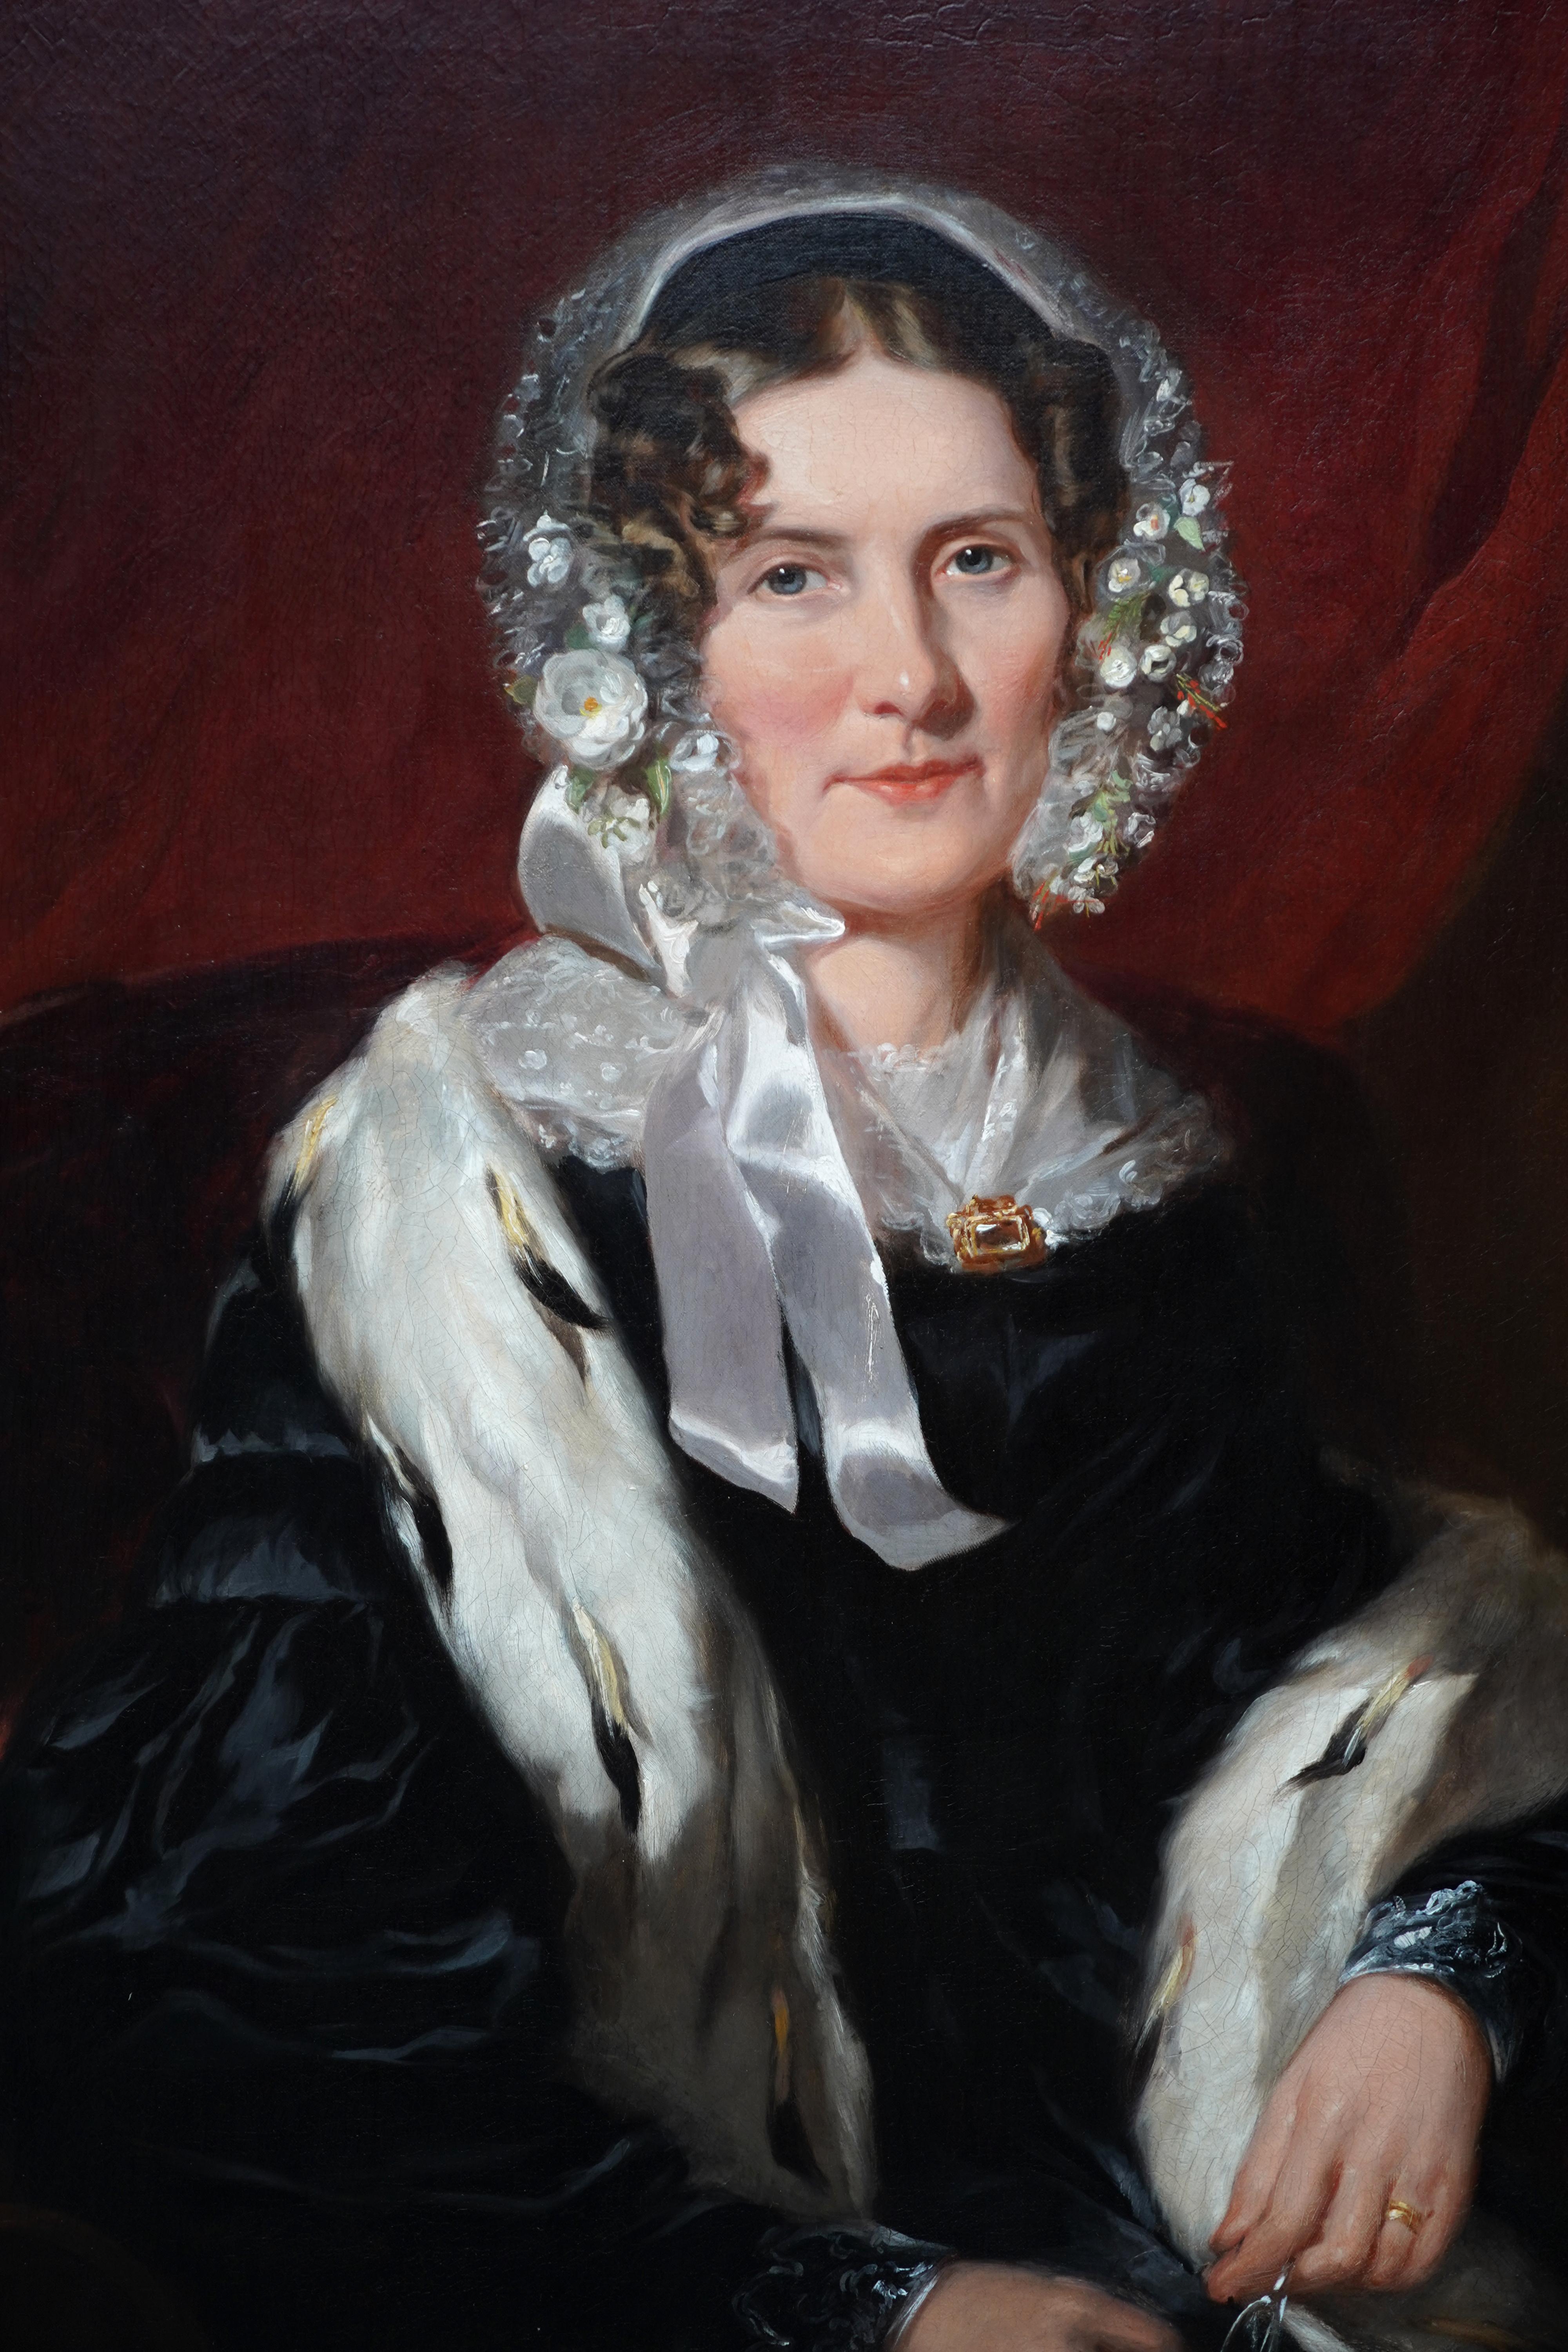 This wonderful 19th century interior portrait oil painting is attributed to the circle of Martin Archer Shee. It is a half-length portrait of a seated lady in a black silk dress, ermine stole and superb floral bonnet. It is a super realistic